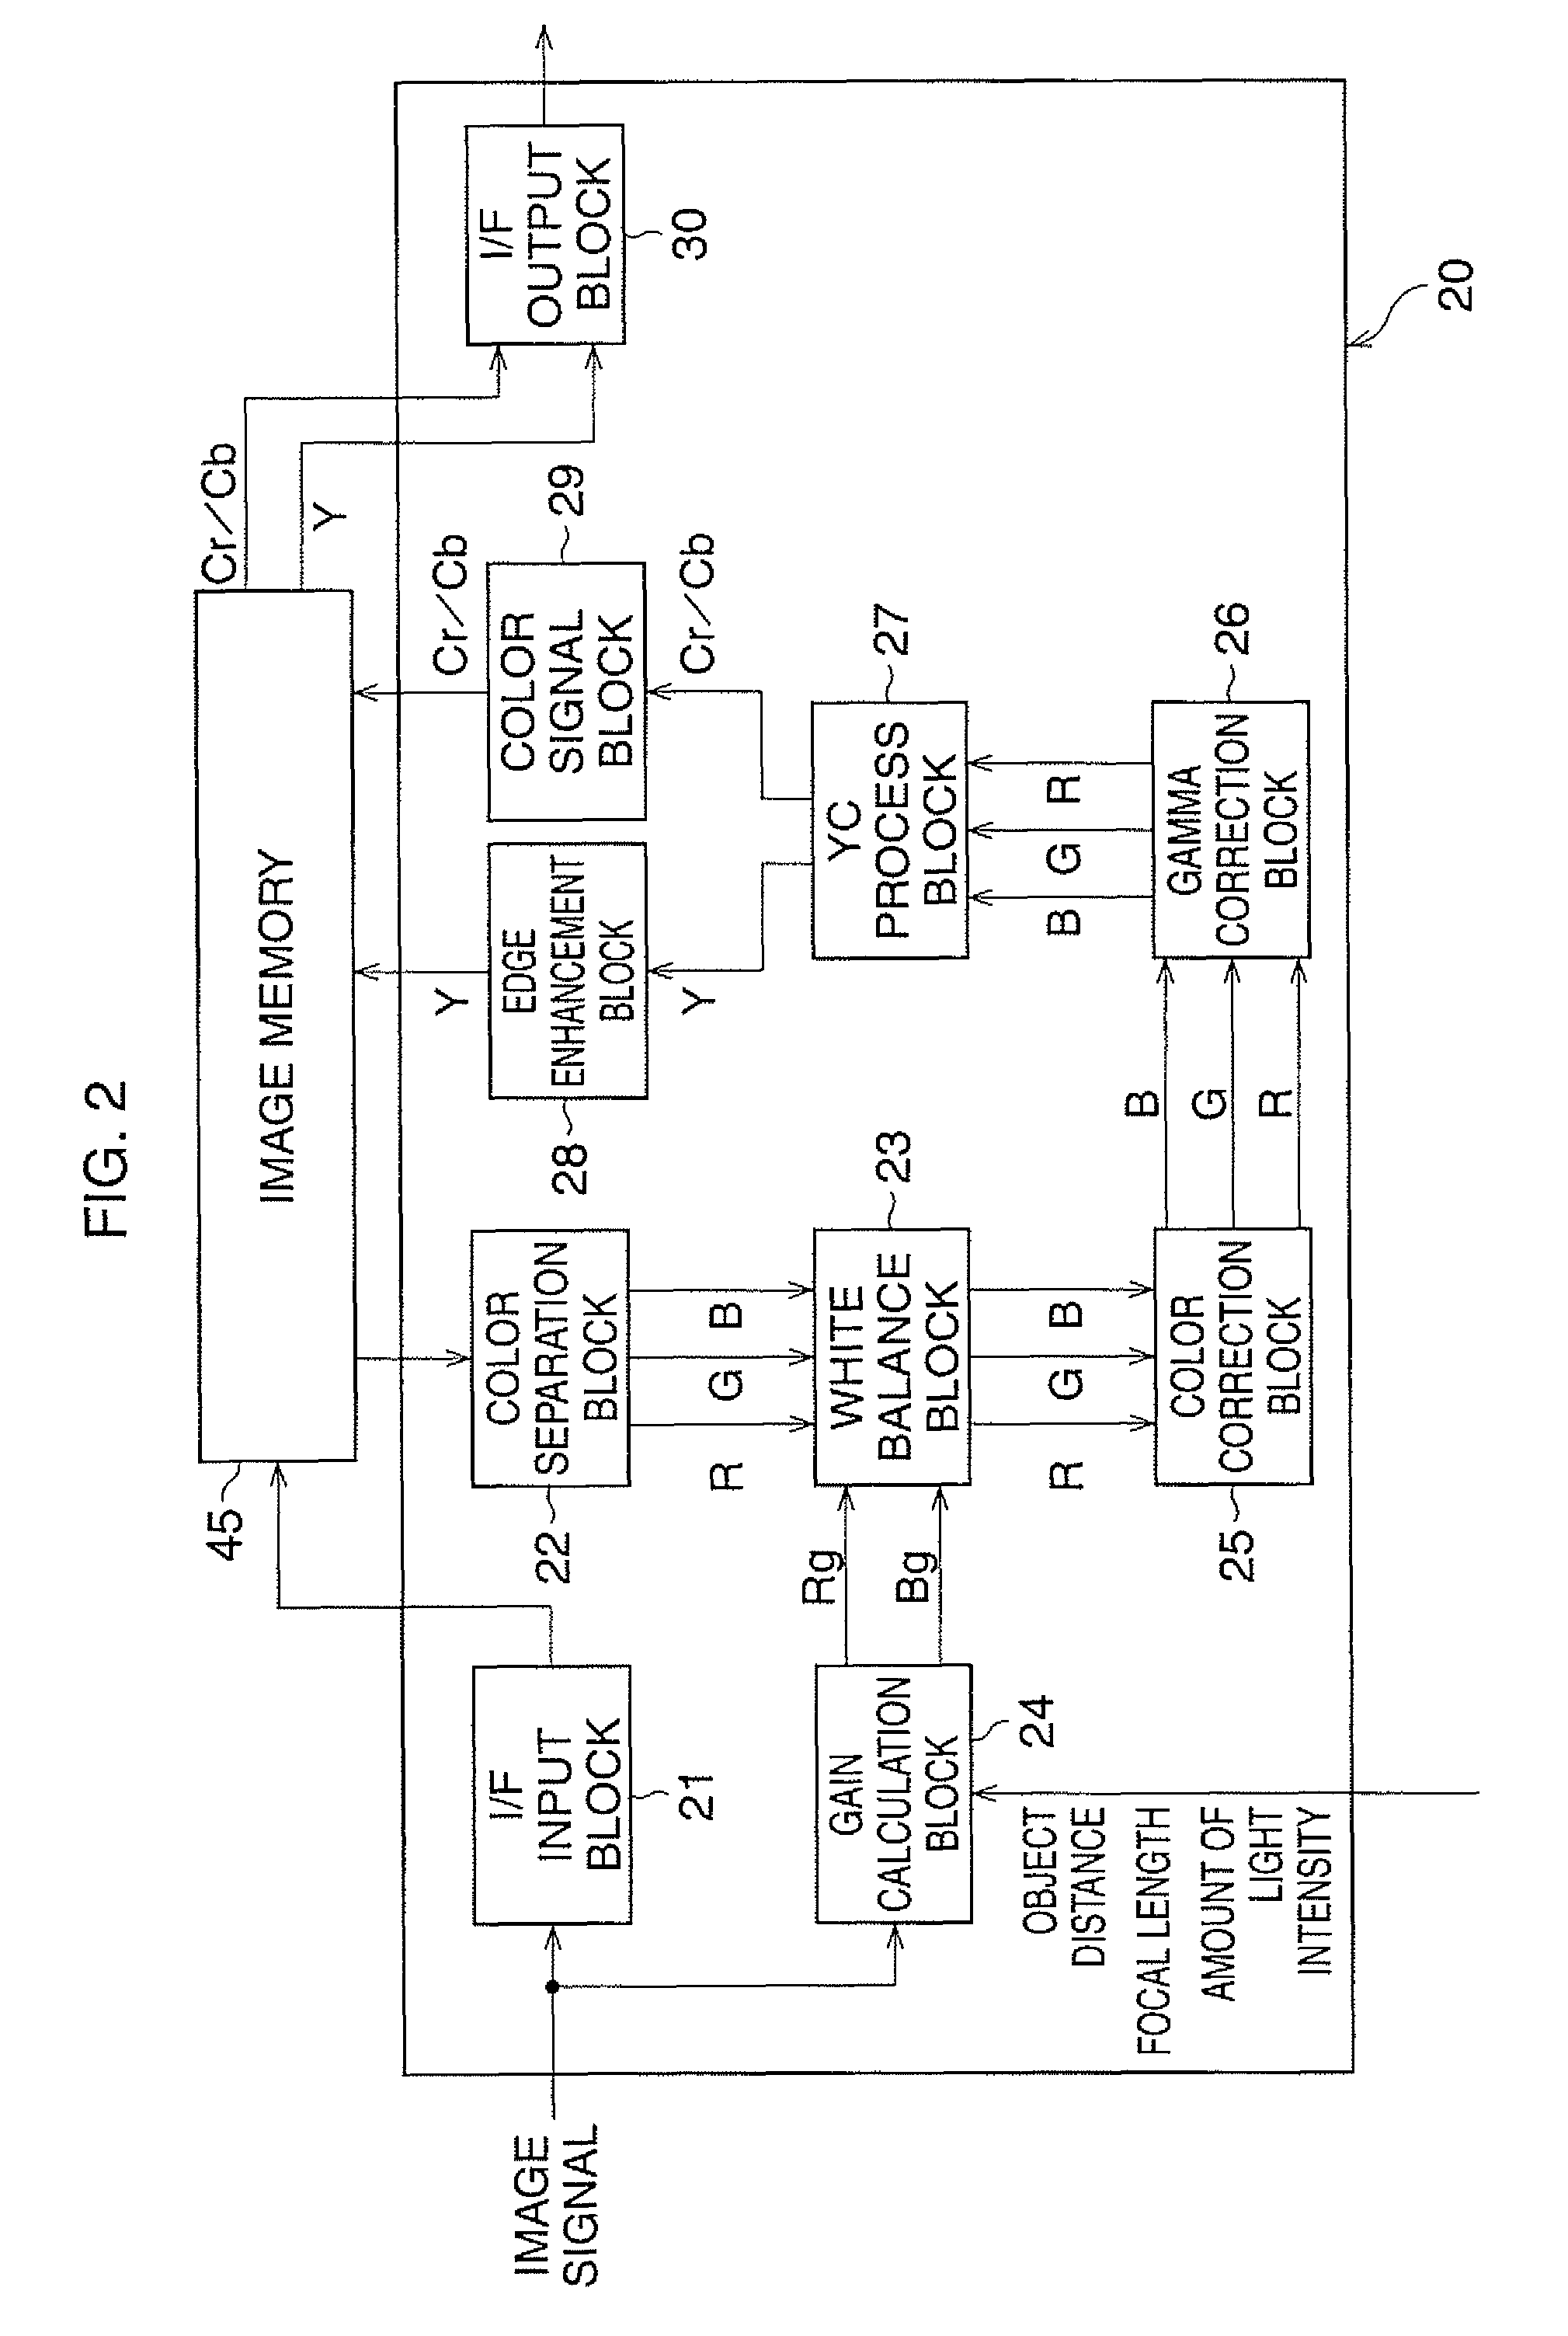 Image signal processor with white balance calculation based upon selected prediction area